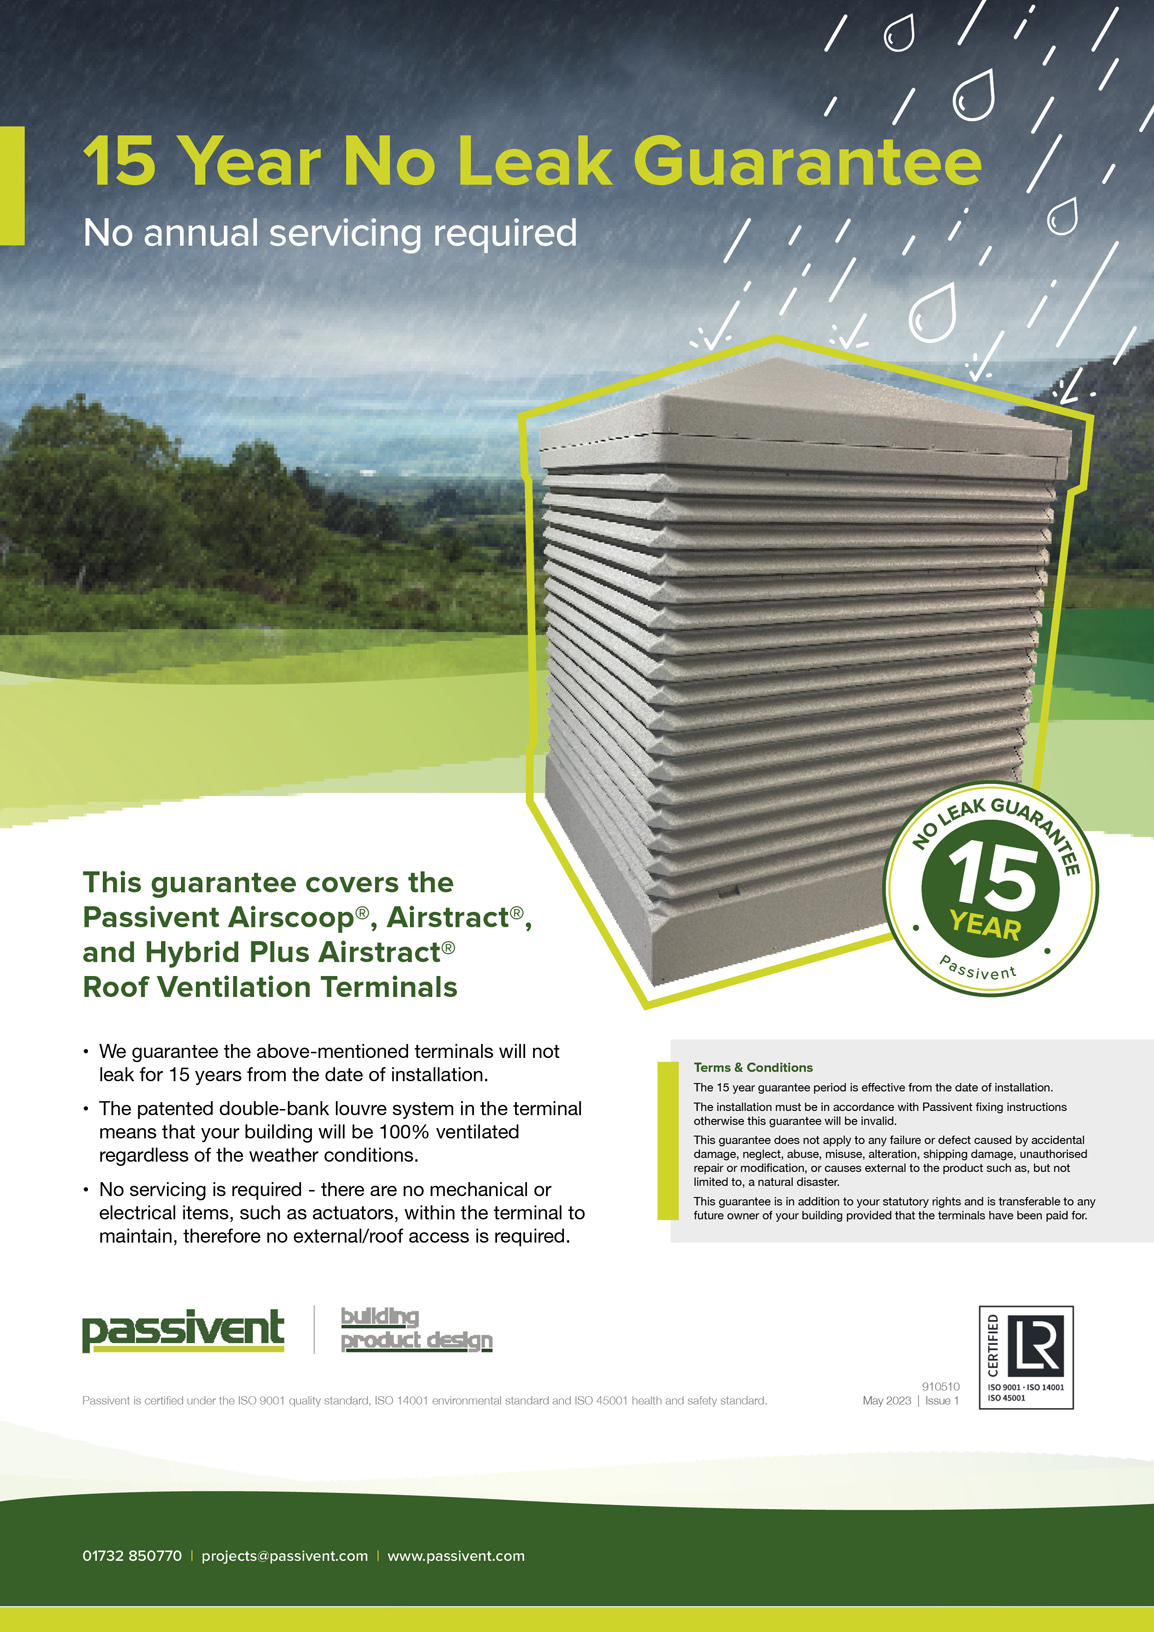 Passivent no leak guarantee protects year after year